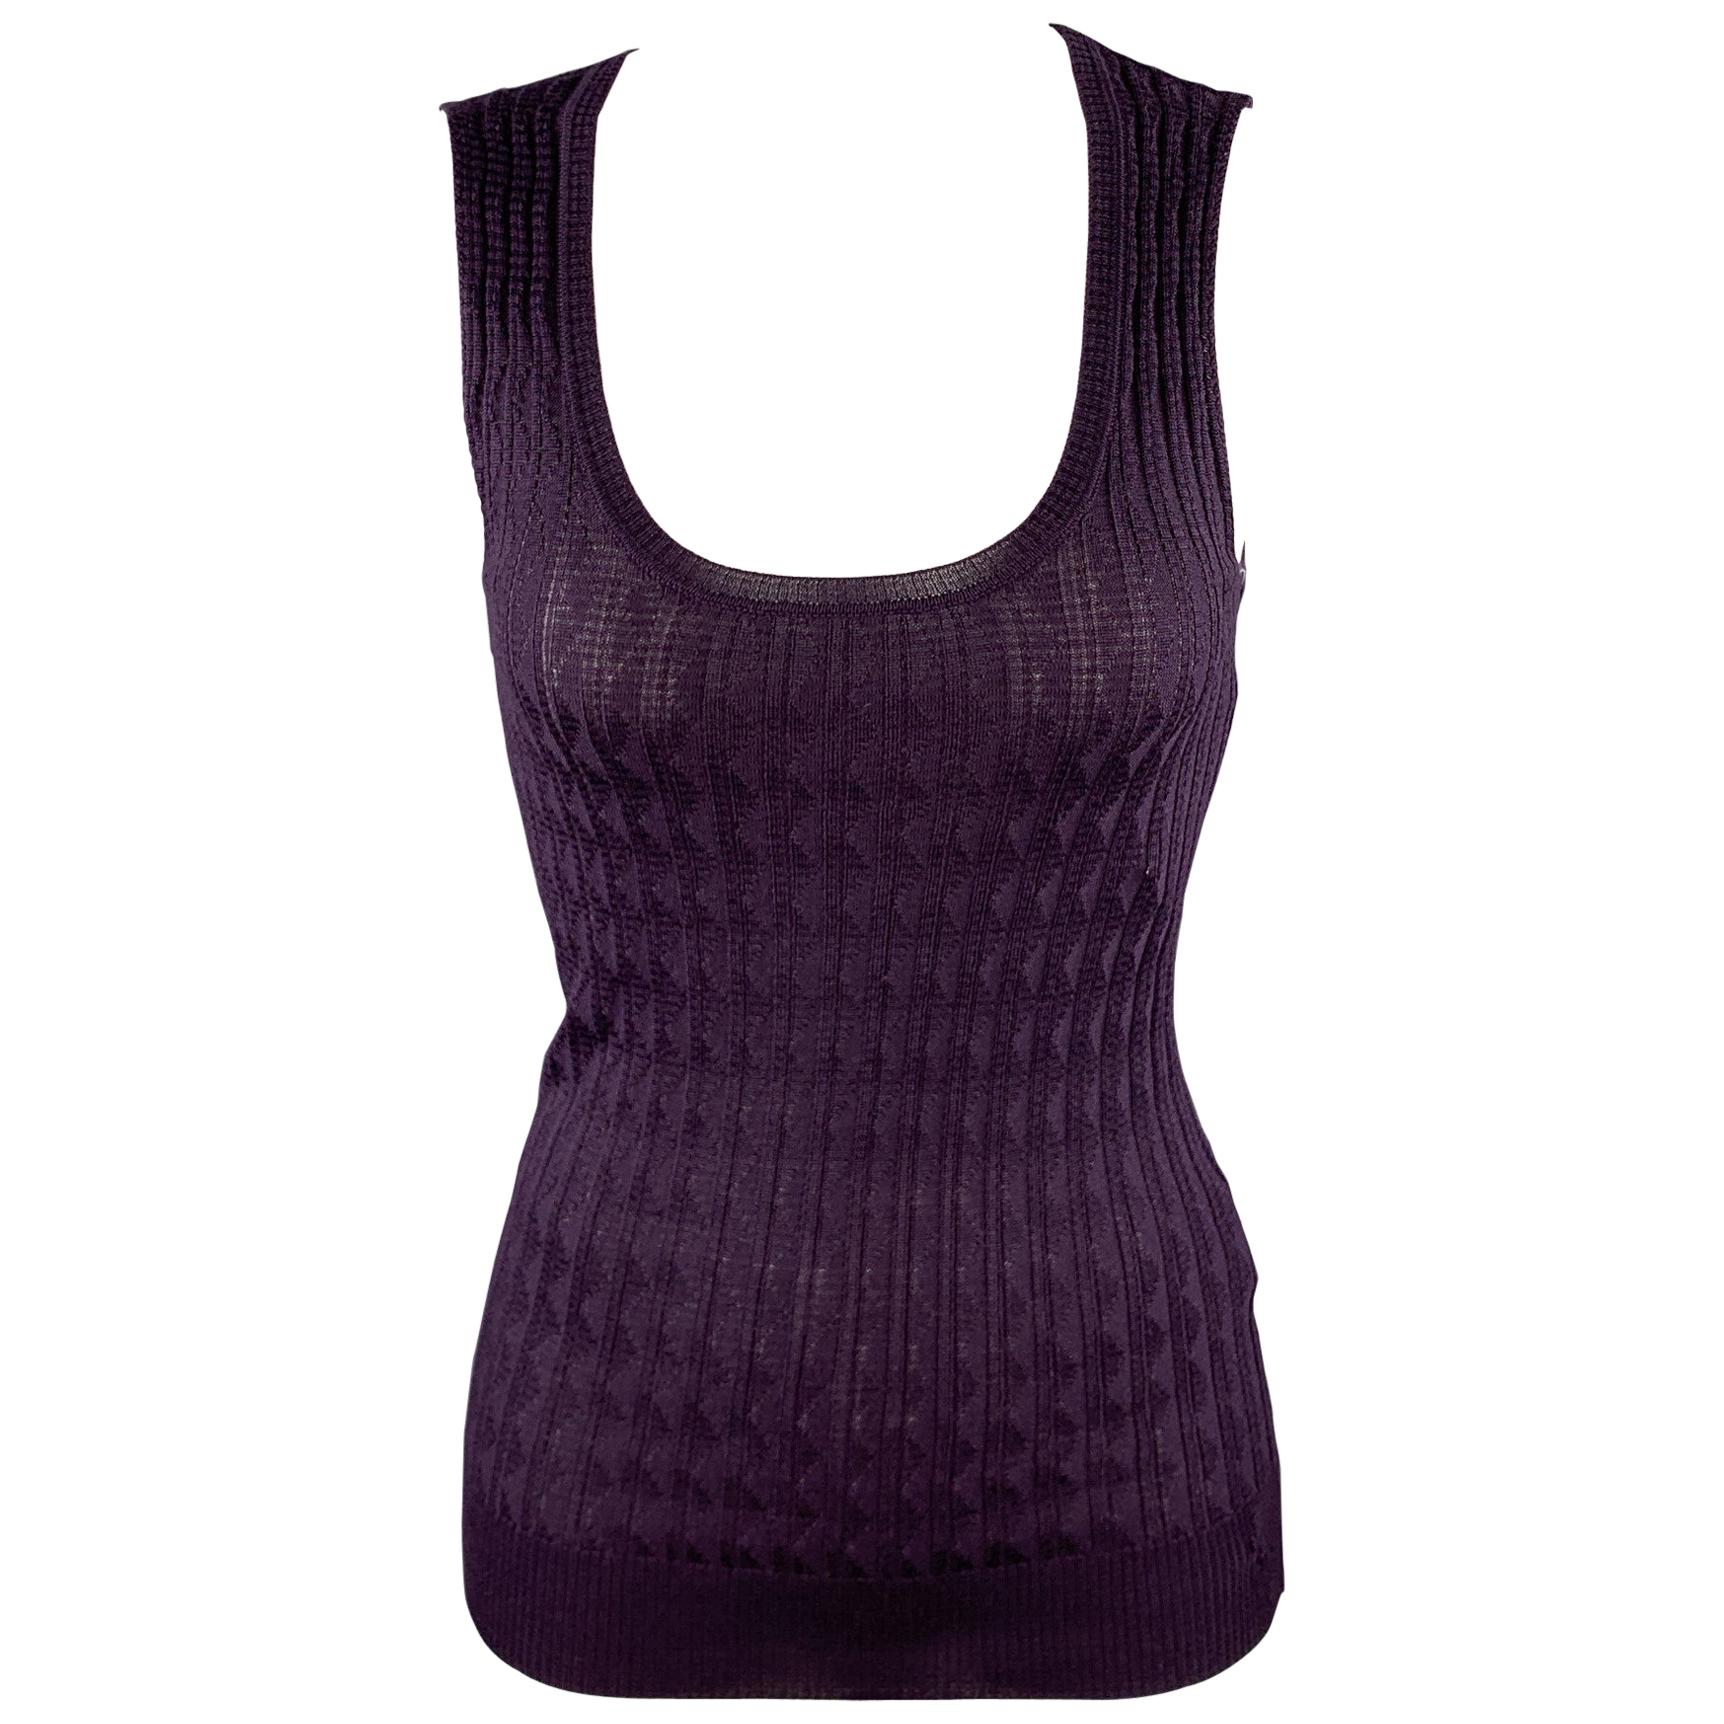 M MISSONI Size 2 Purple Knitted Textured Wool / Viscose Casual Sleeveless Top